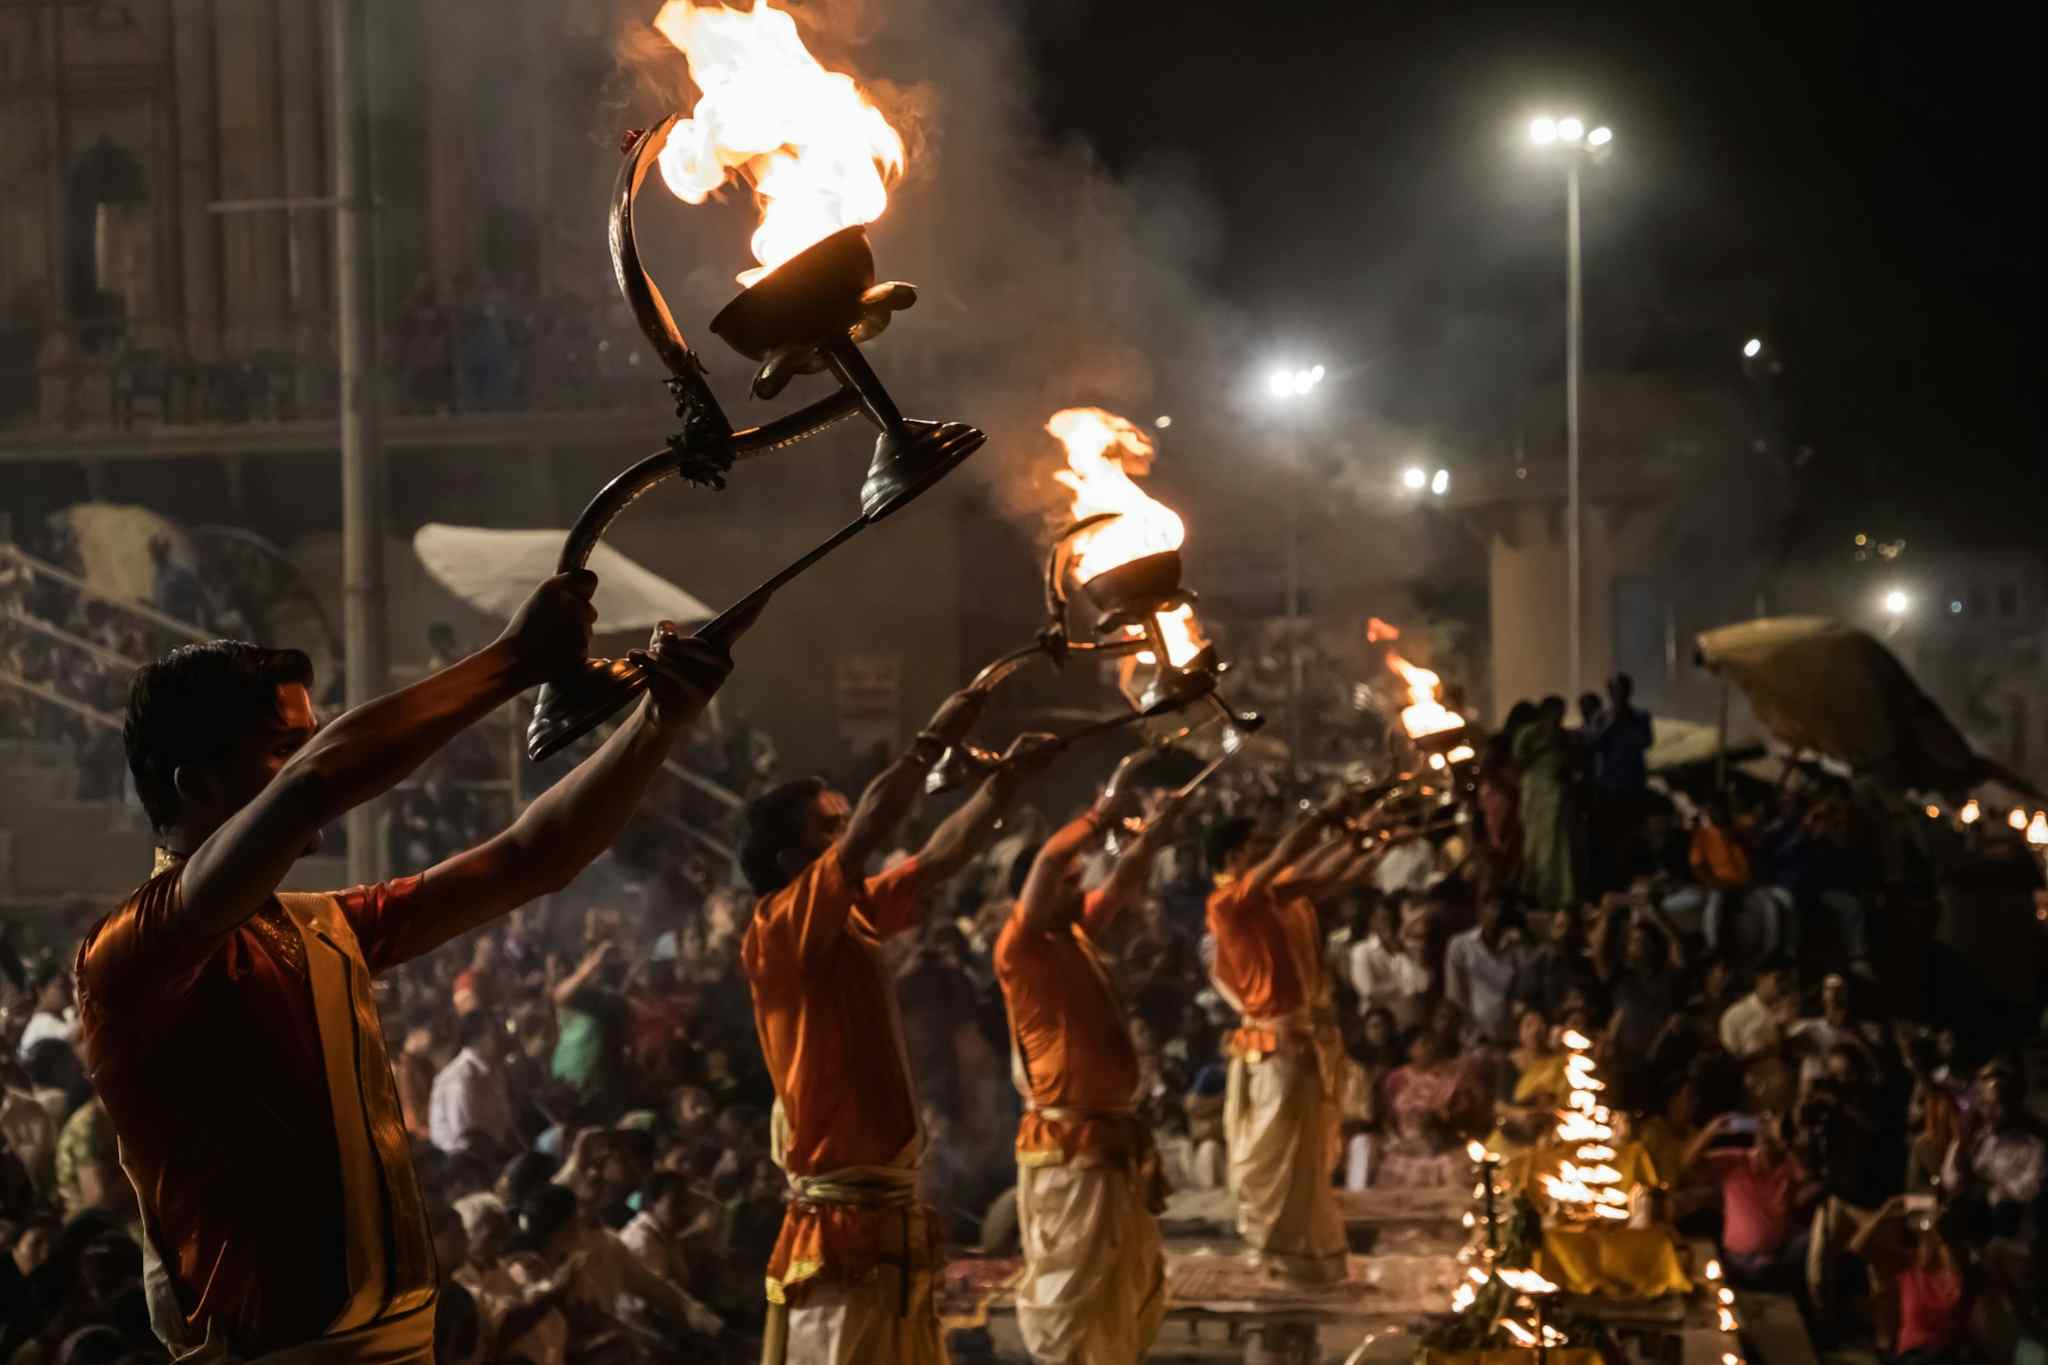 Ganga aarti, rishikesh, india - Canva link: https://www.canva.com/photos/MAEevVdASEI-people-holding-torches/